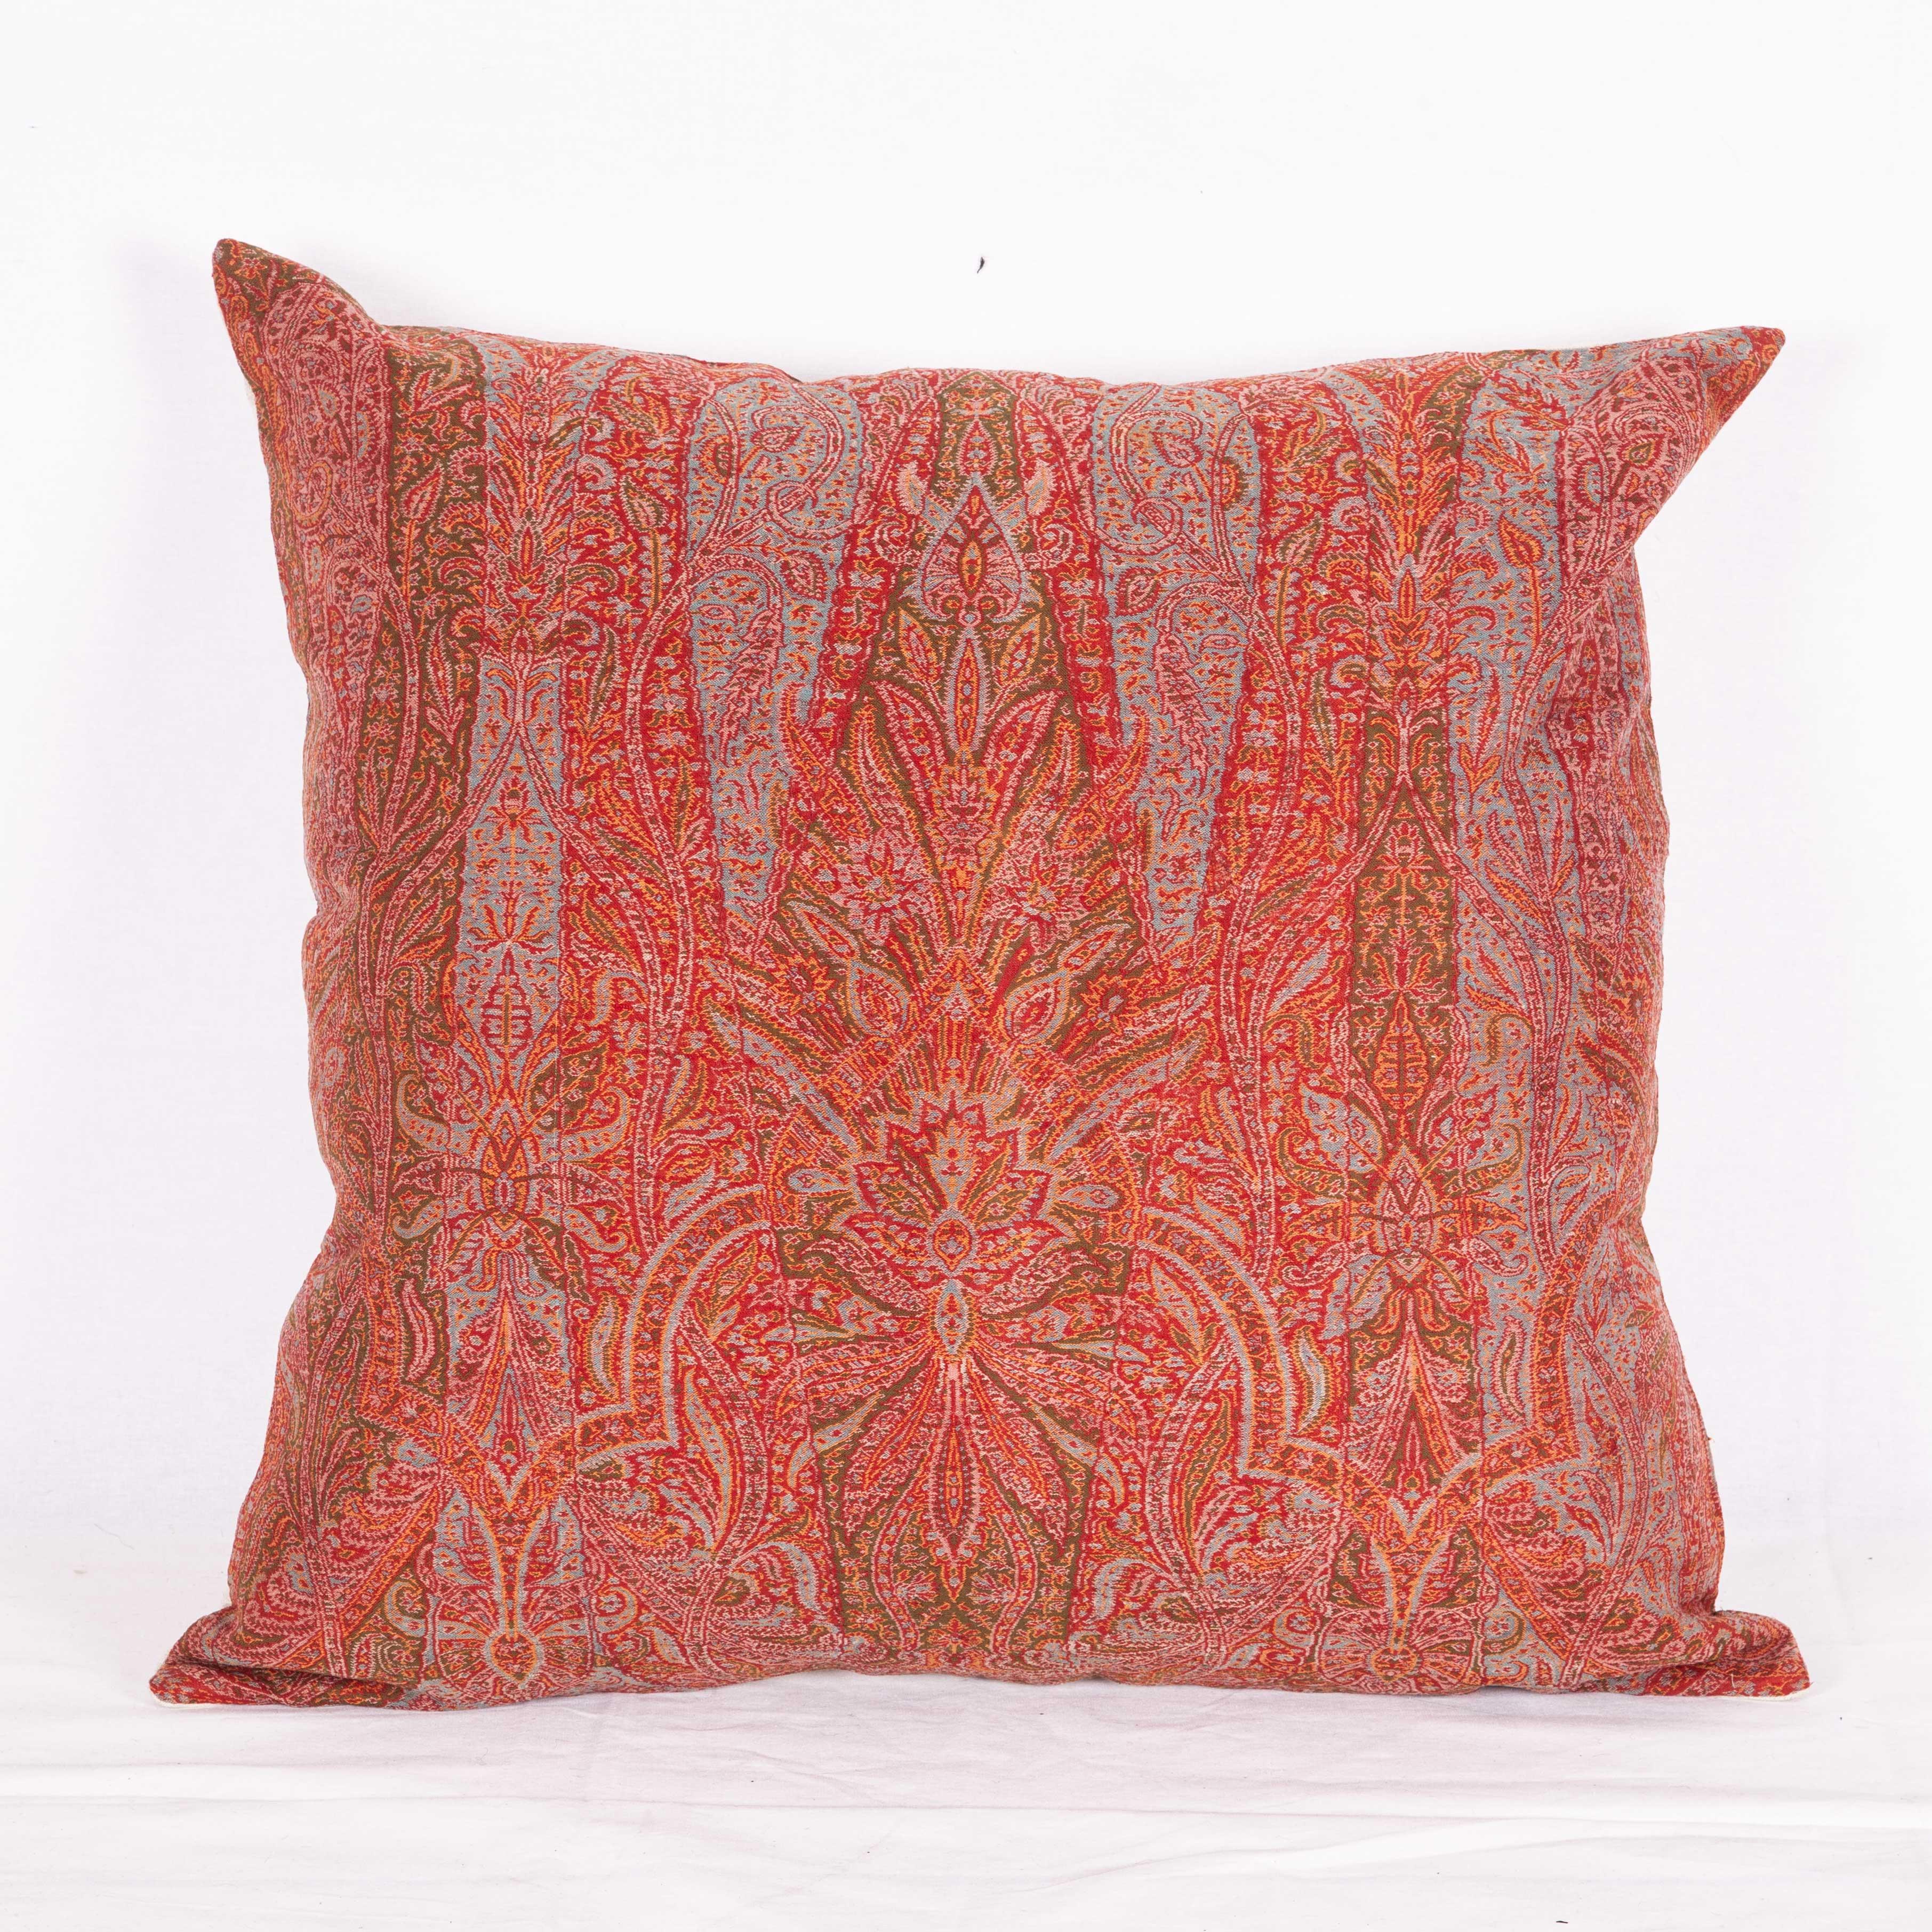 The pillow is made out of an early 19th century paisley shawl. It does not come with an insert but it comes with a bag made to the size and out of cotton to accommodate the filling. The backing is made of linen. Please note: Filling is not provided.